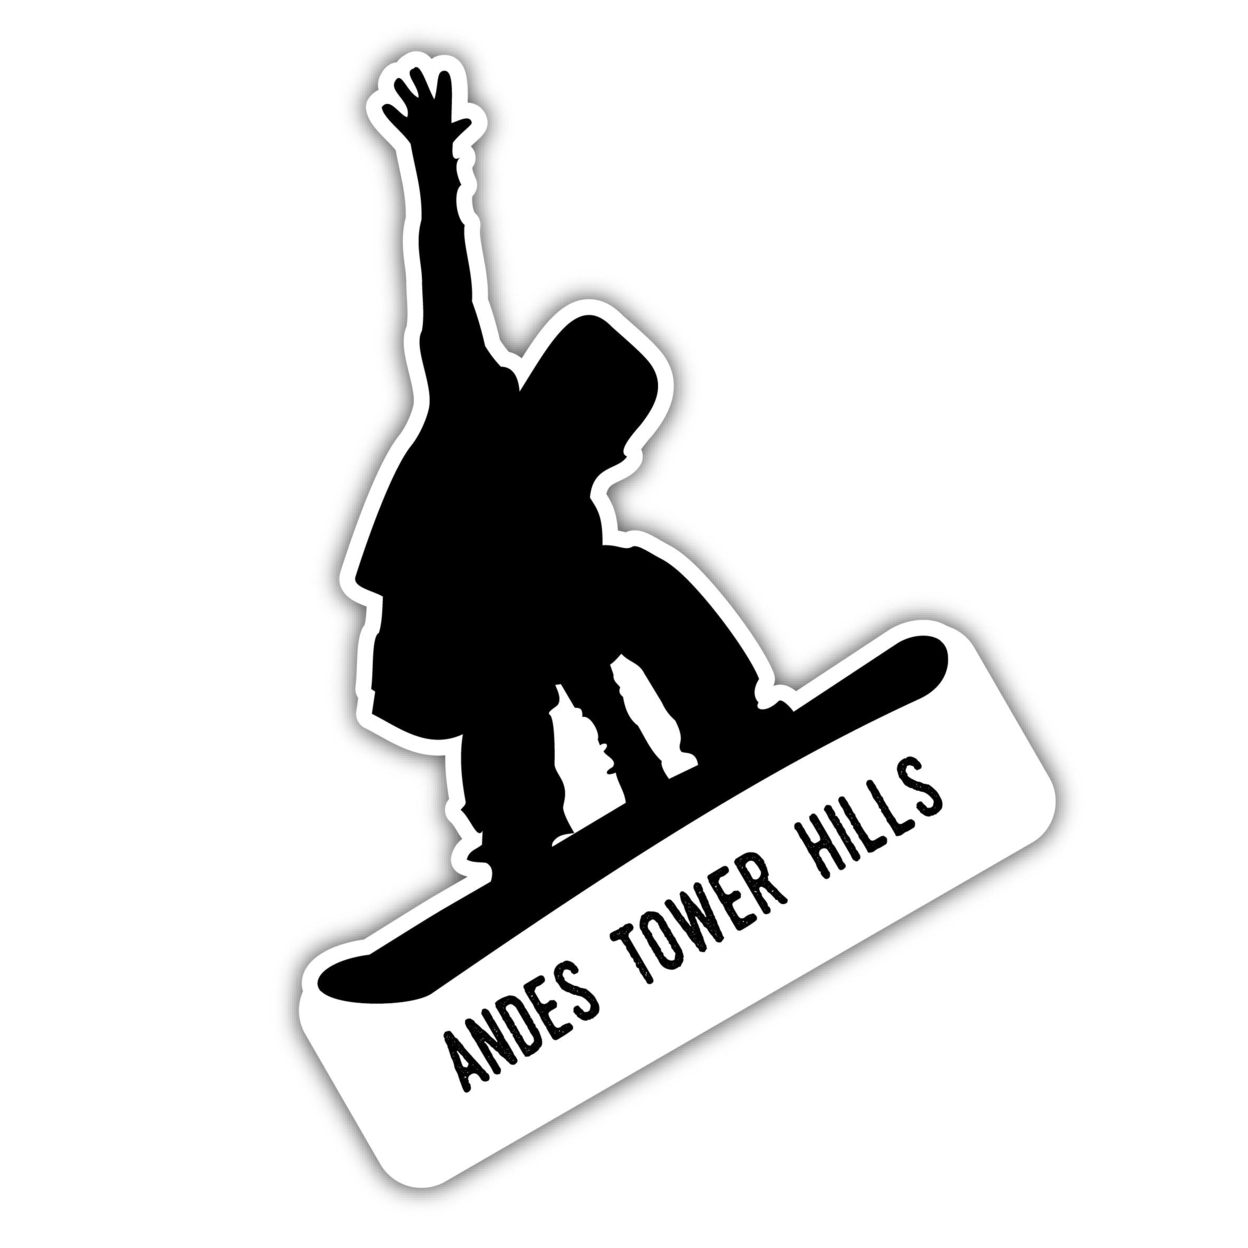 Andes Tower Hills Minnesota Ski Adventures Souvenir Approximately 5 X 2.5-Inch Vinyl Decal Sticker Goggle Design